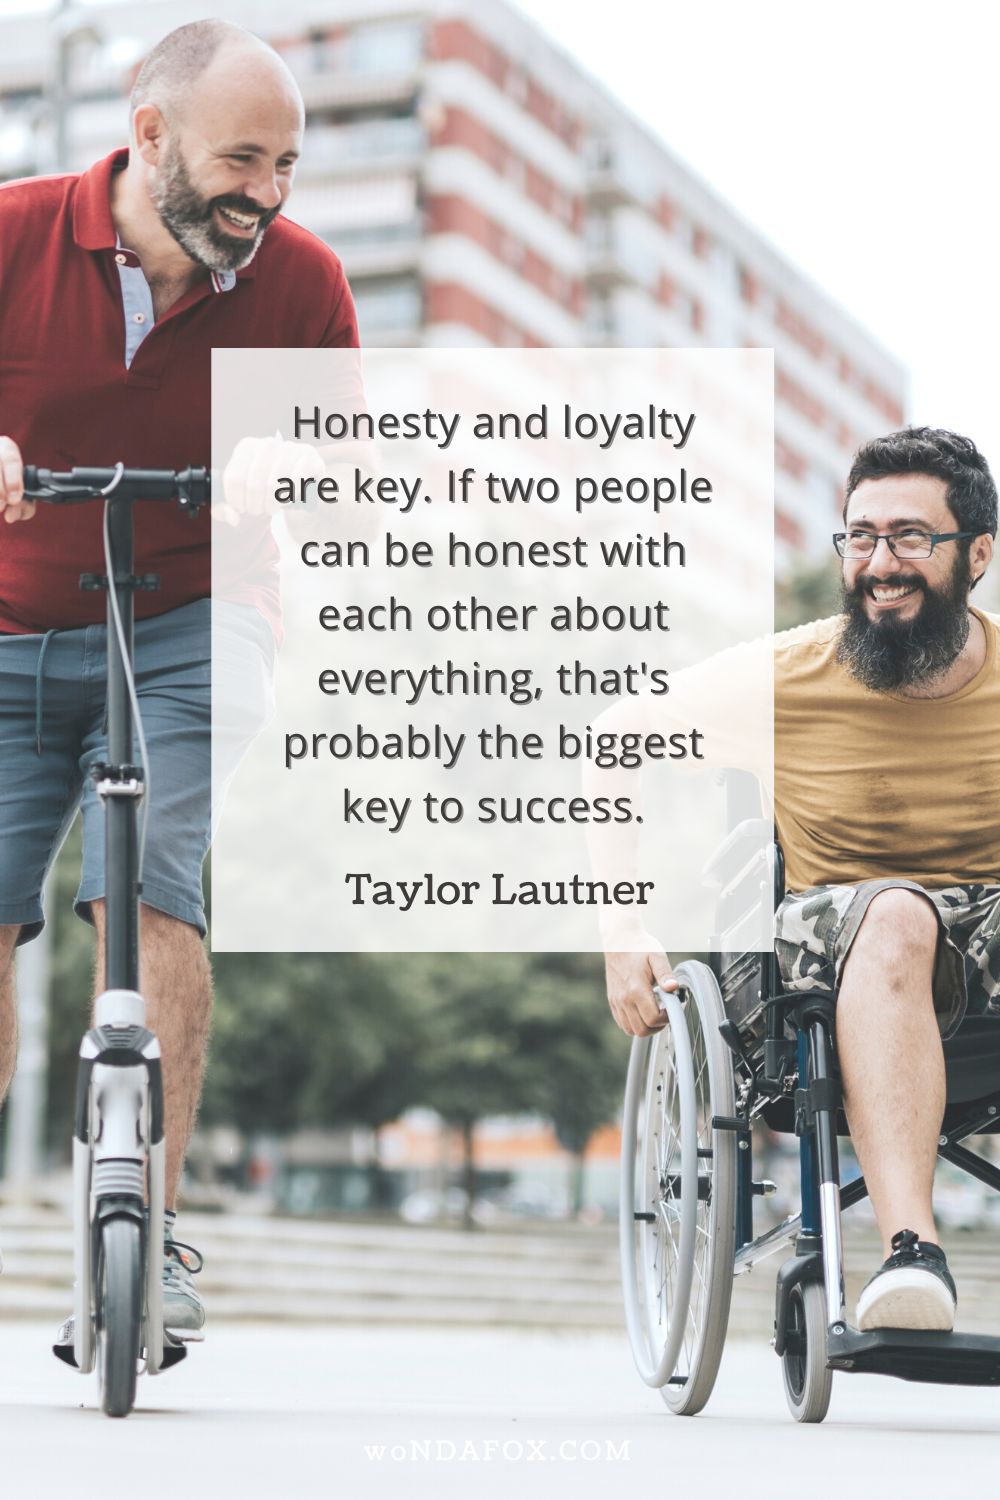 Honesty and loyalty are key. If two people can be honest with each other about everything, that's probably the biggest key to success.